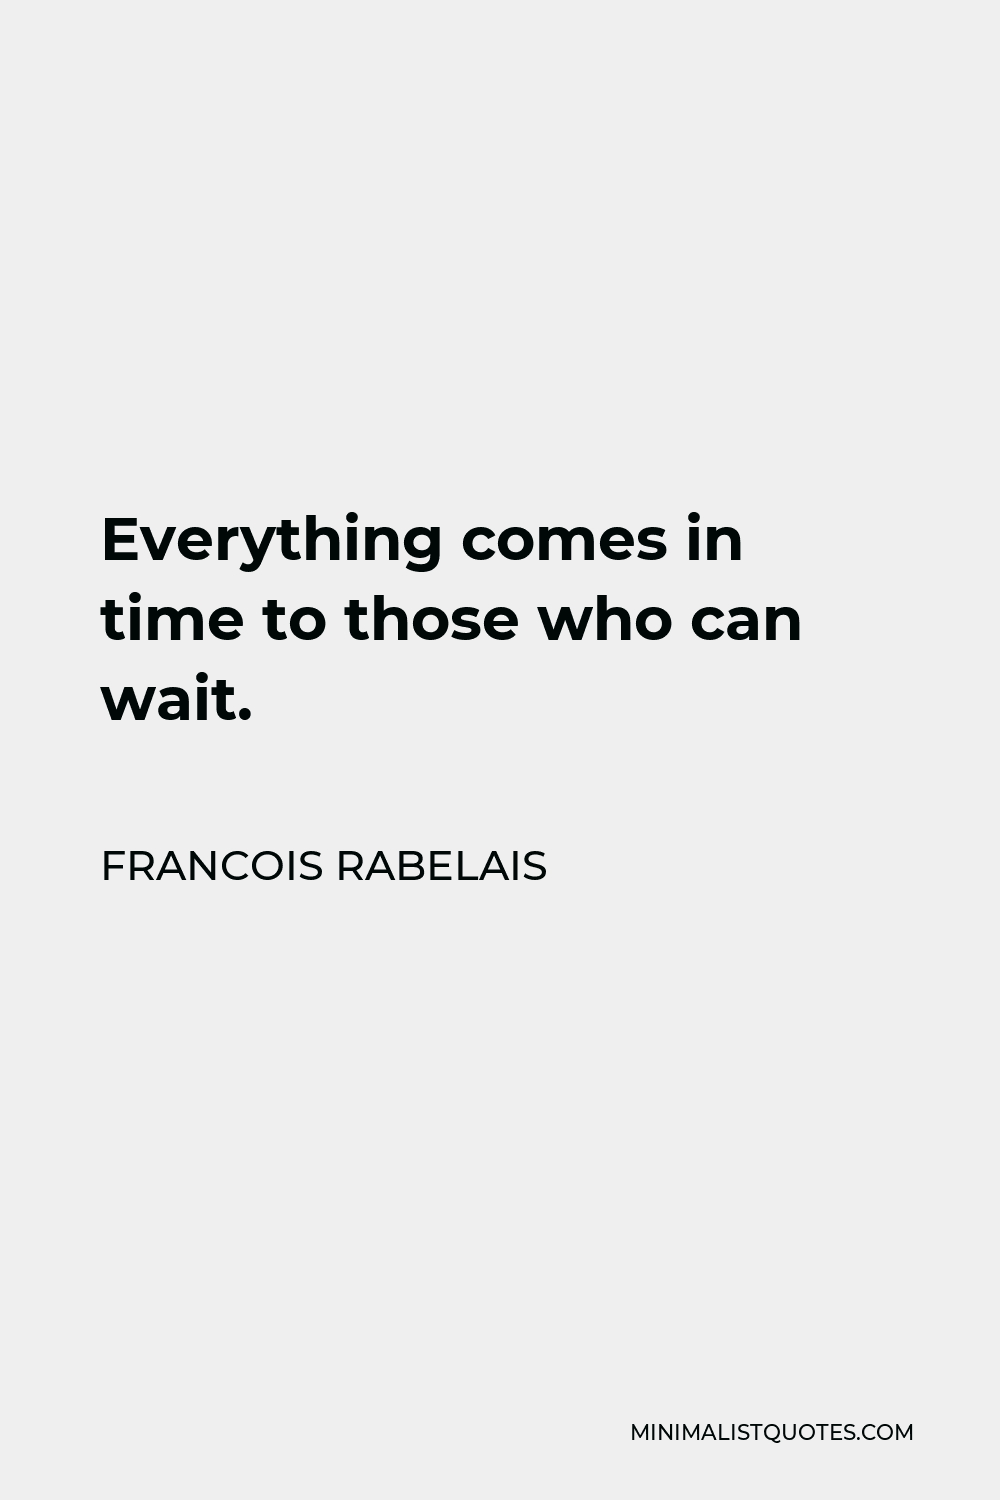 Francois Rabelais Quote - Everything comes in time to those who can wait.